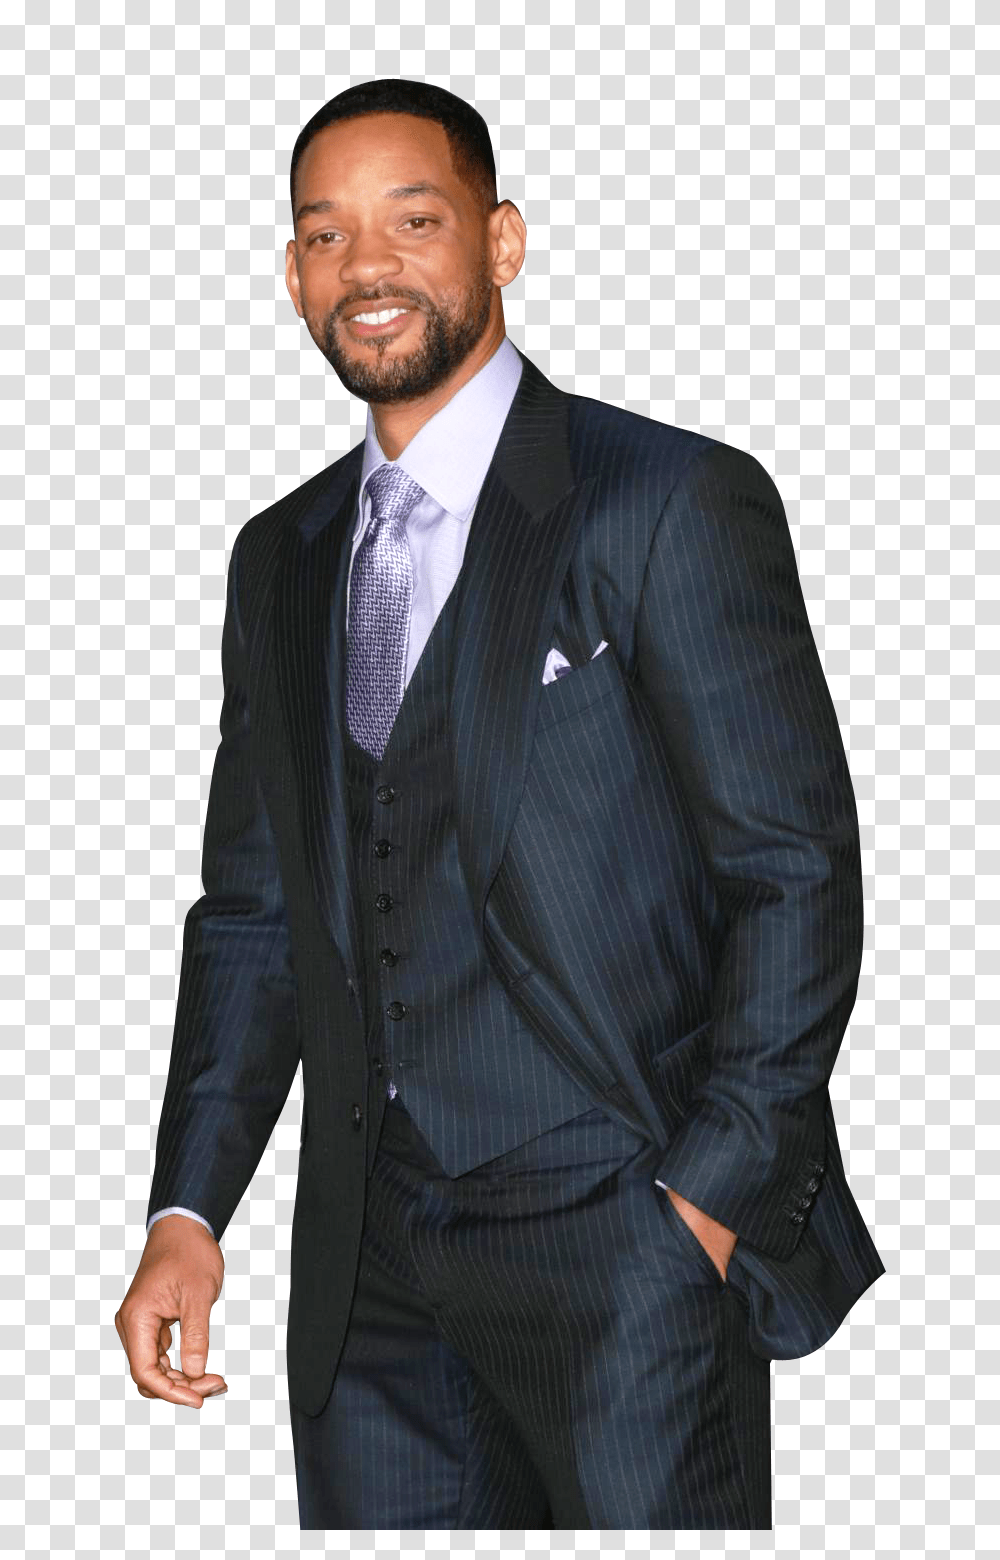 Will Smith Image, Celebrity, Suit, Overcoat Transparent Png